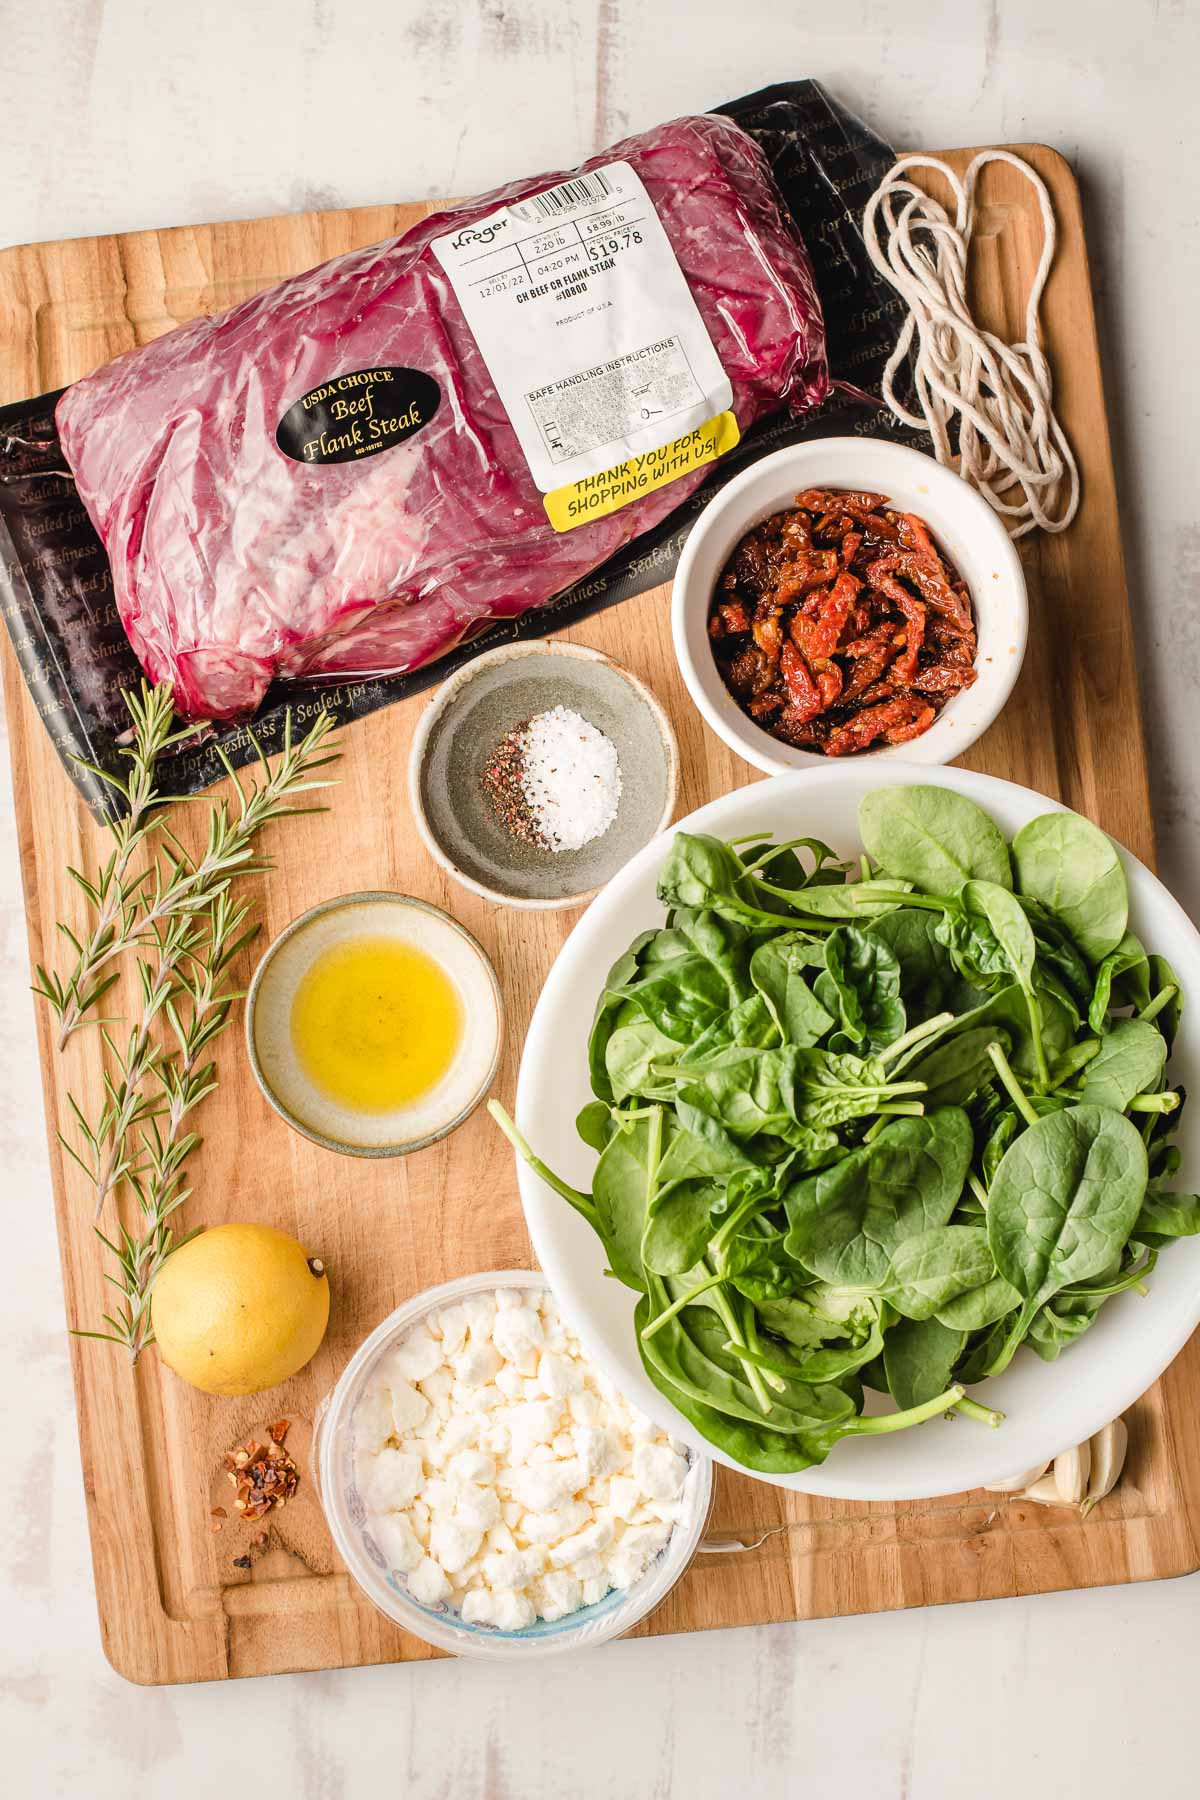 Cutting board with a package of flank steak, fresh spinach, olive oil, lemon, salt, sun dried tomatoes, and feta.